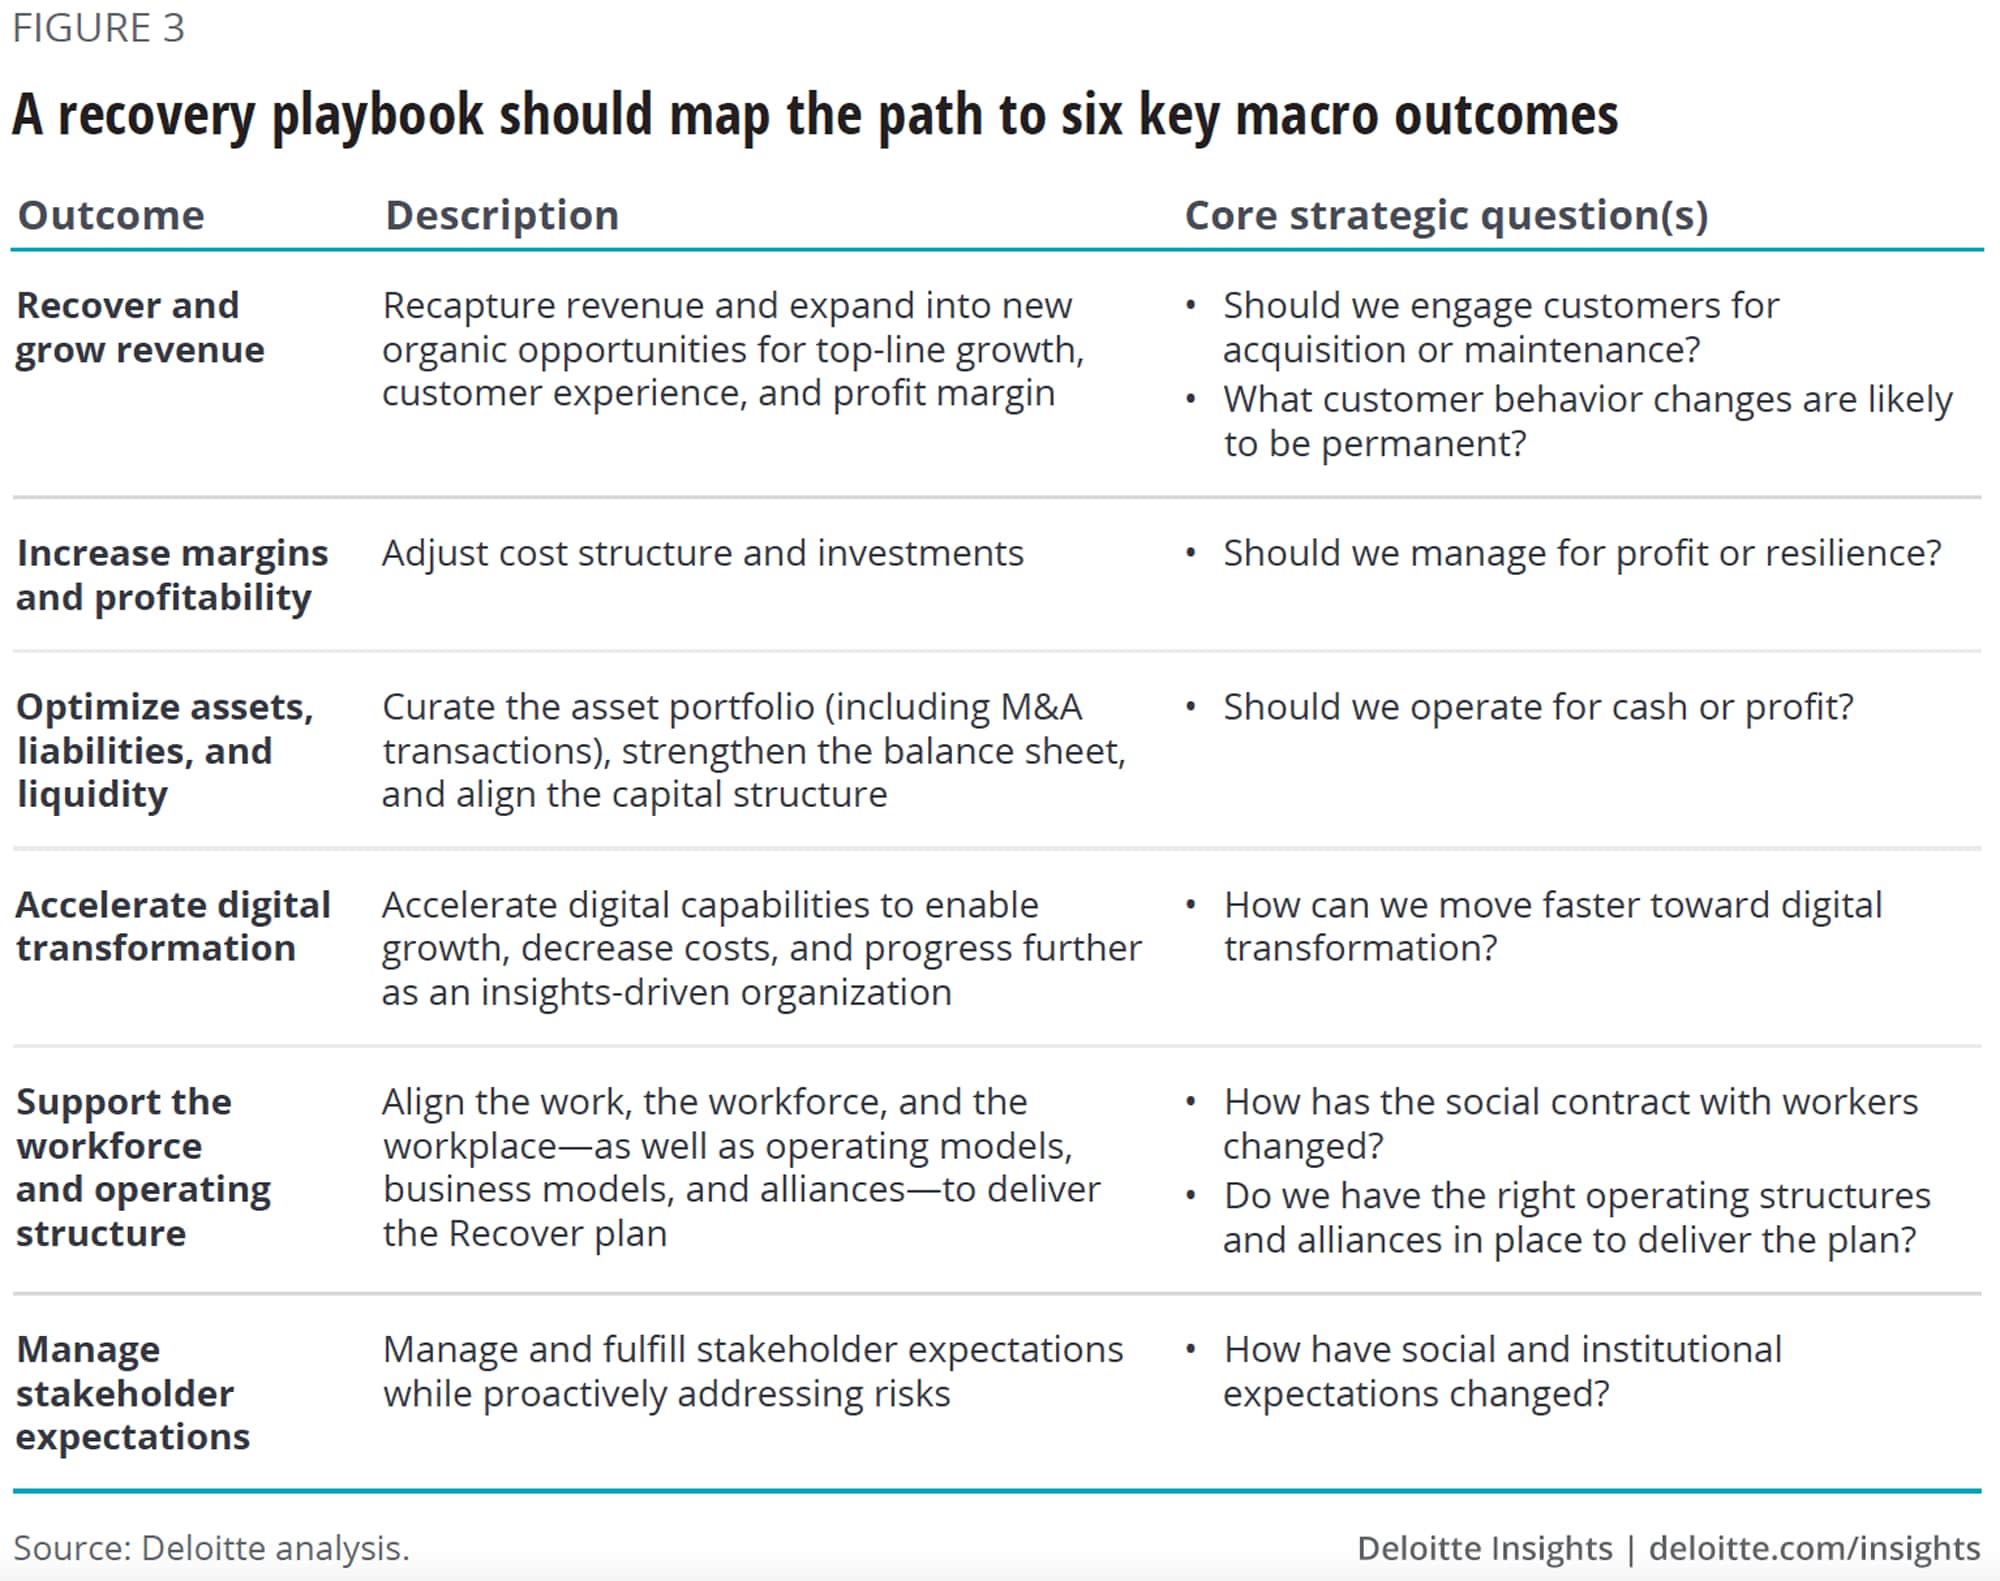 A recovery playbook should map the path to six key macro outcomes